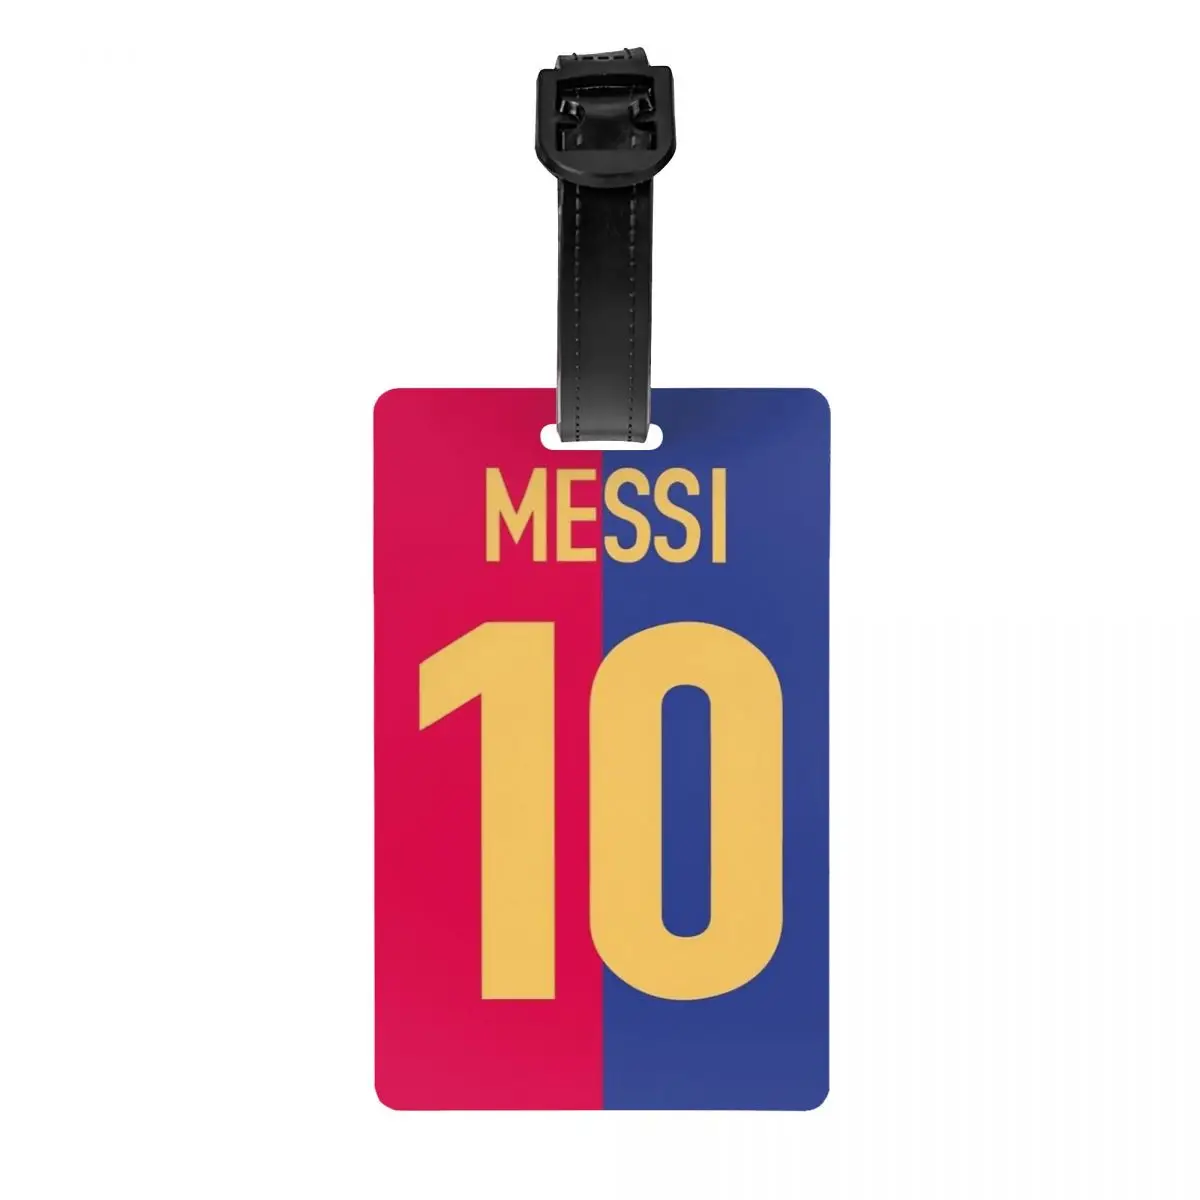 

Custom Messied 10 Soccer Luggage Tag Privacy Protection Argentina Baggage Tags Travel Bag Labels Suitcase